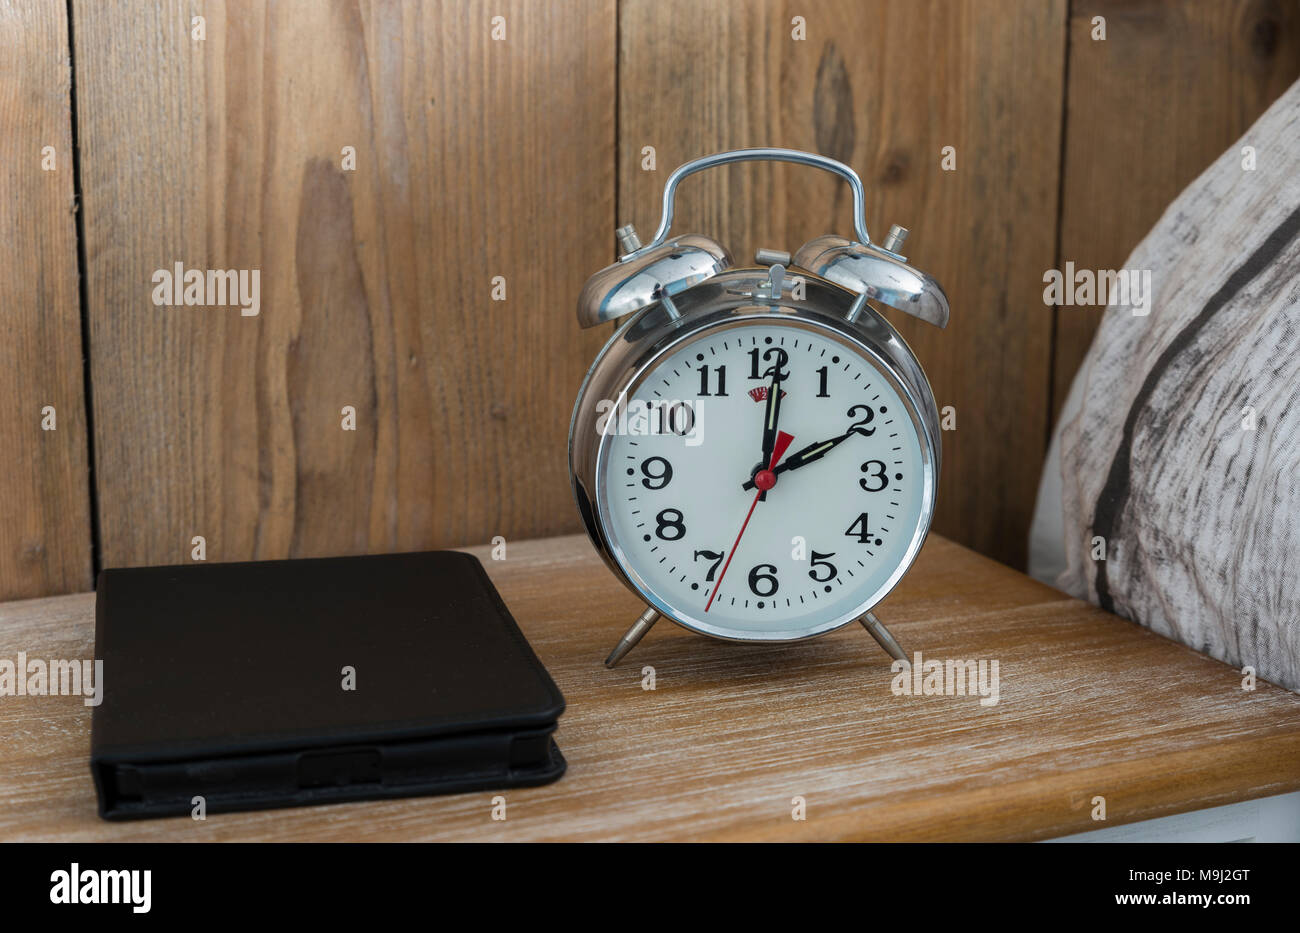 An old fashioned silver coloured bed side analogue pre digital alarm clock and modern ereader on bedside table Stock Photo